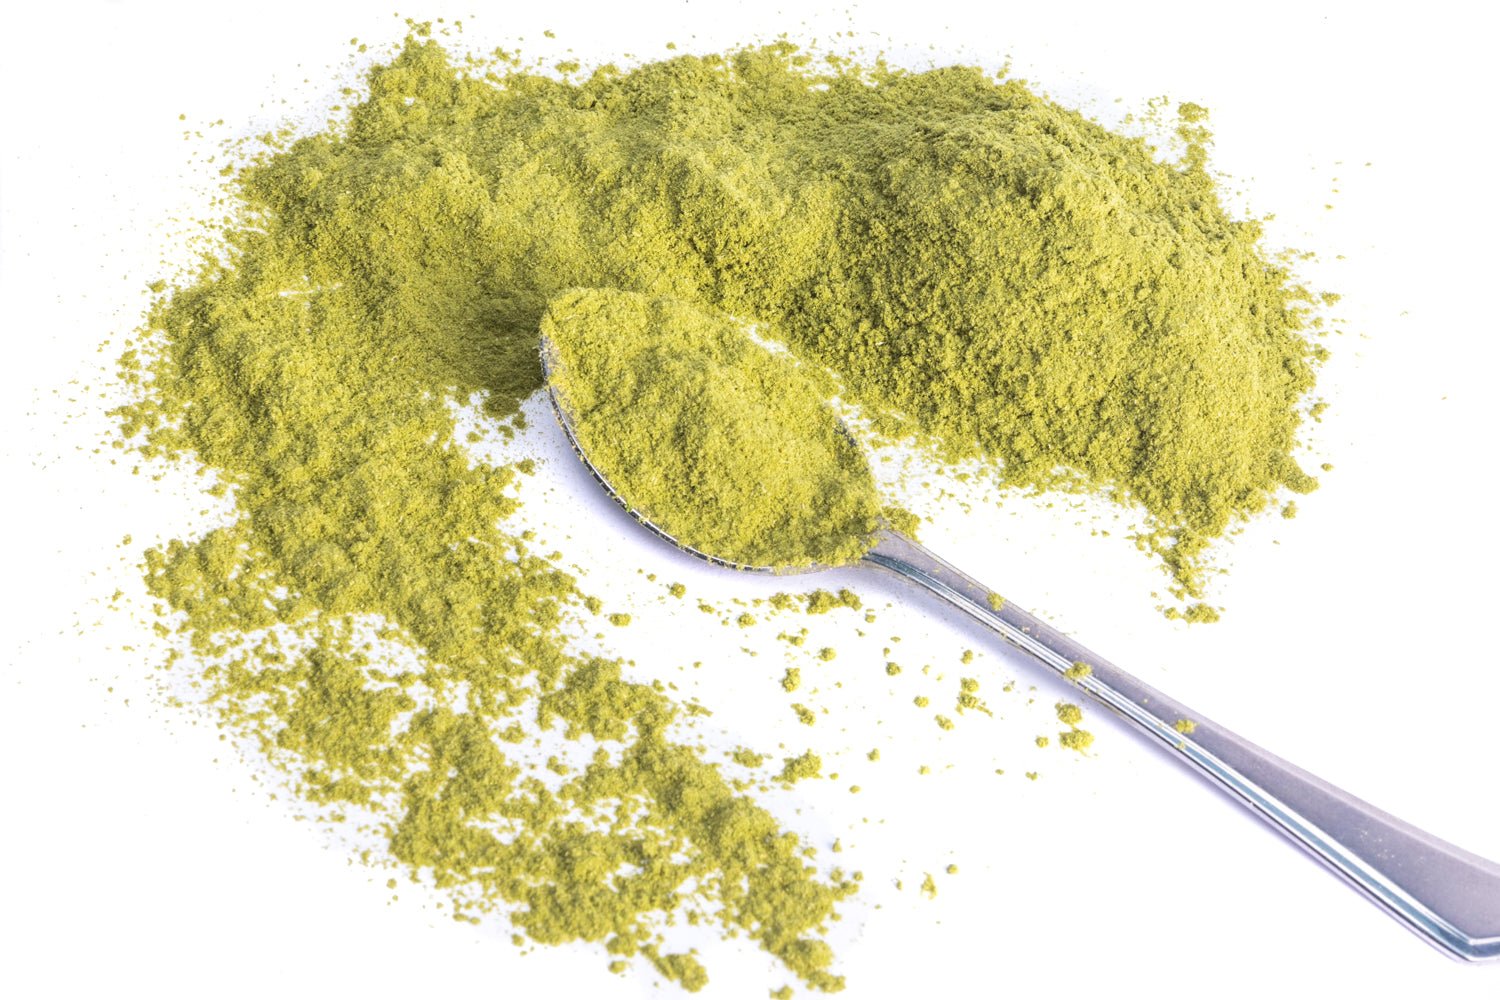 JUX food freeze dried Spinach powder on a teaspoon